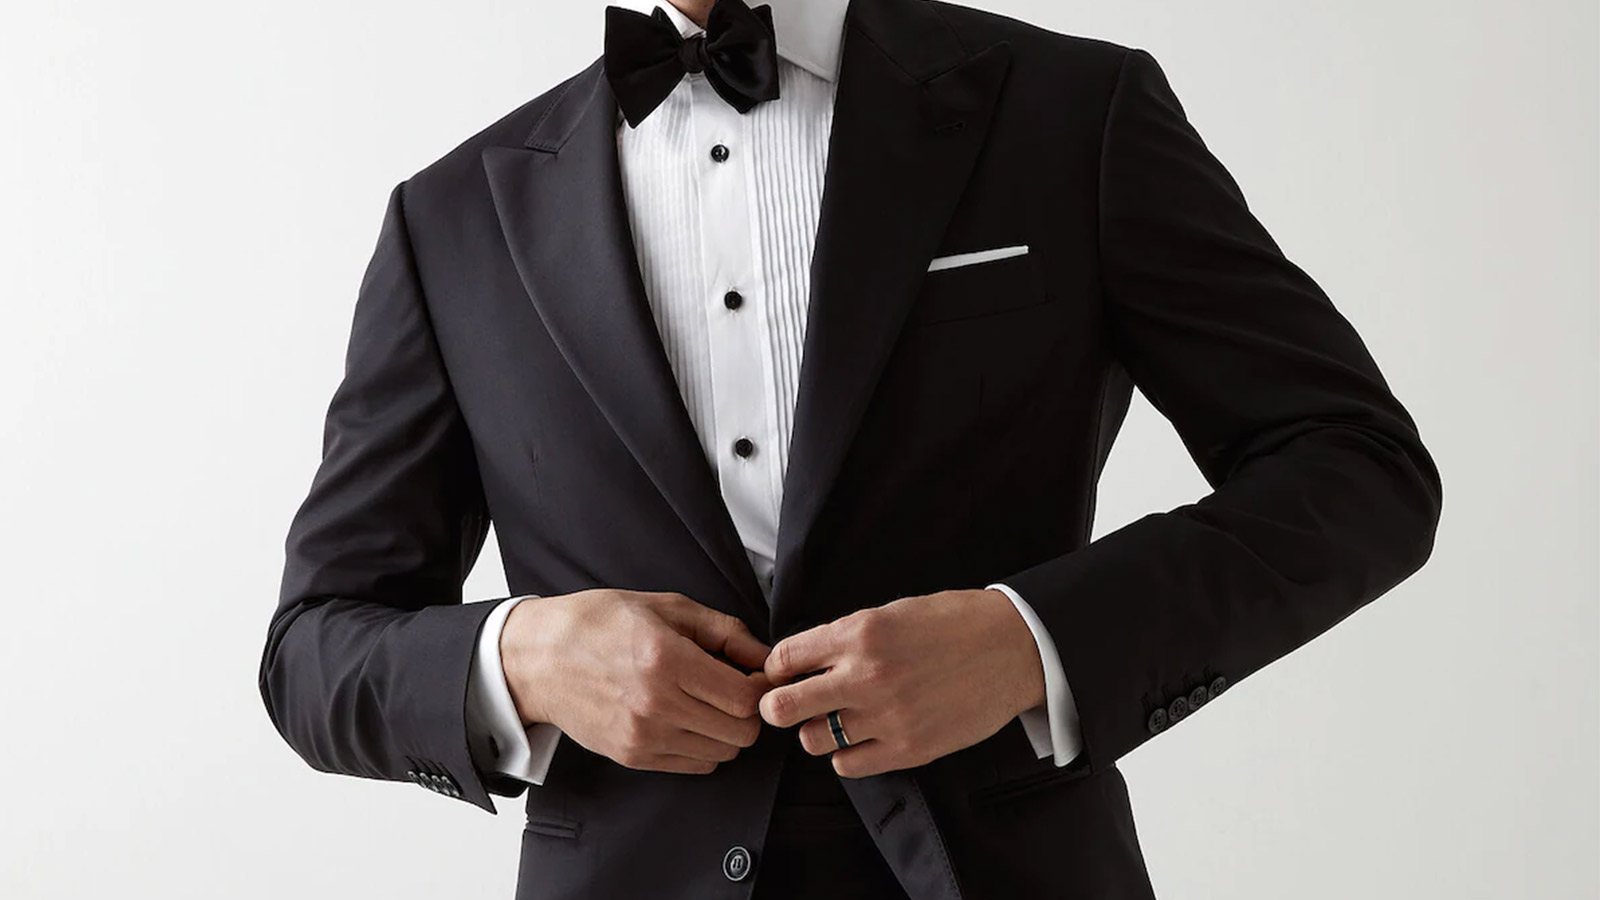 The man in the black suit is unbuttoning his buttons and wearing the man's wedding ring on his hand